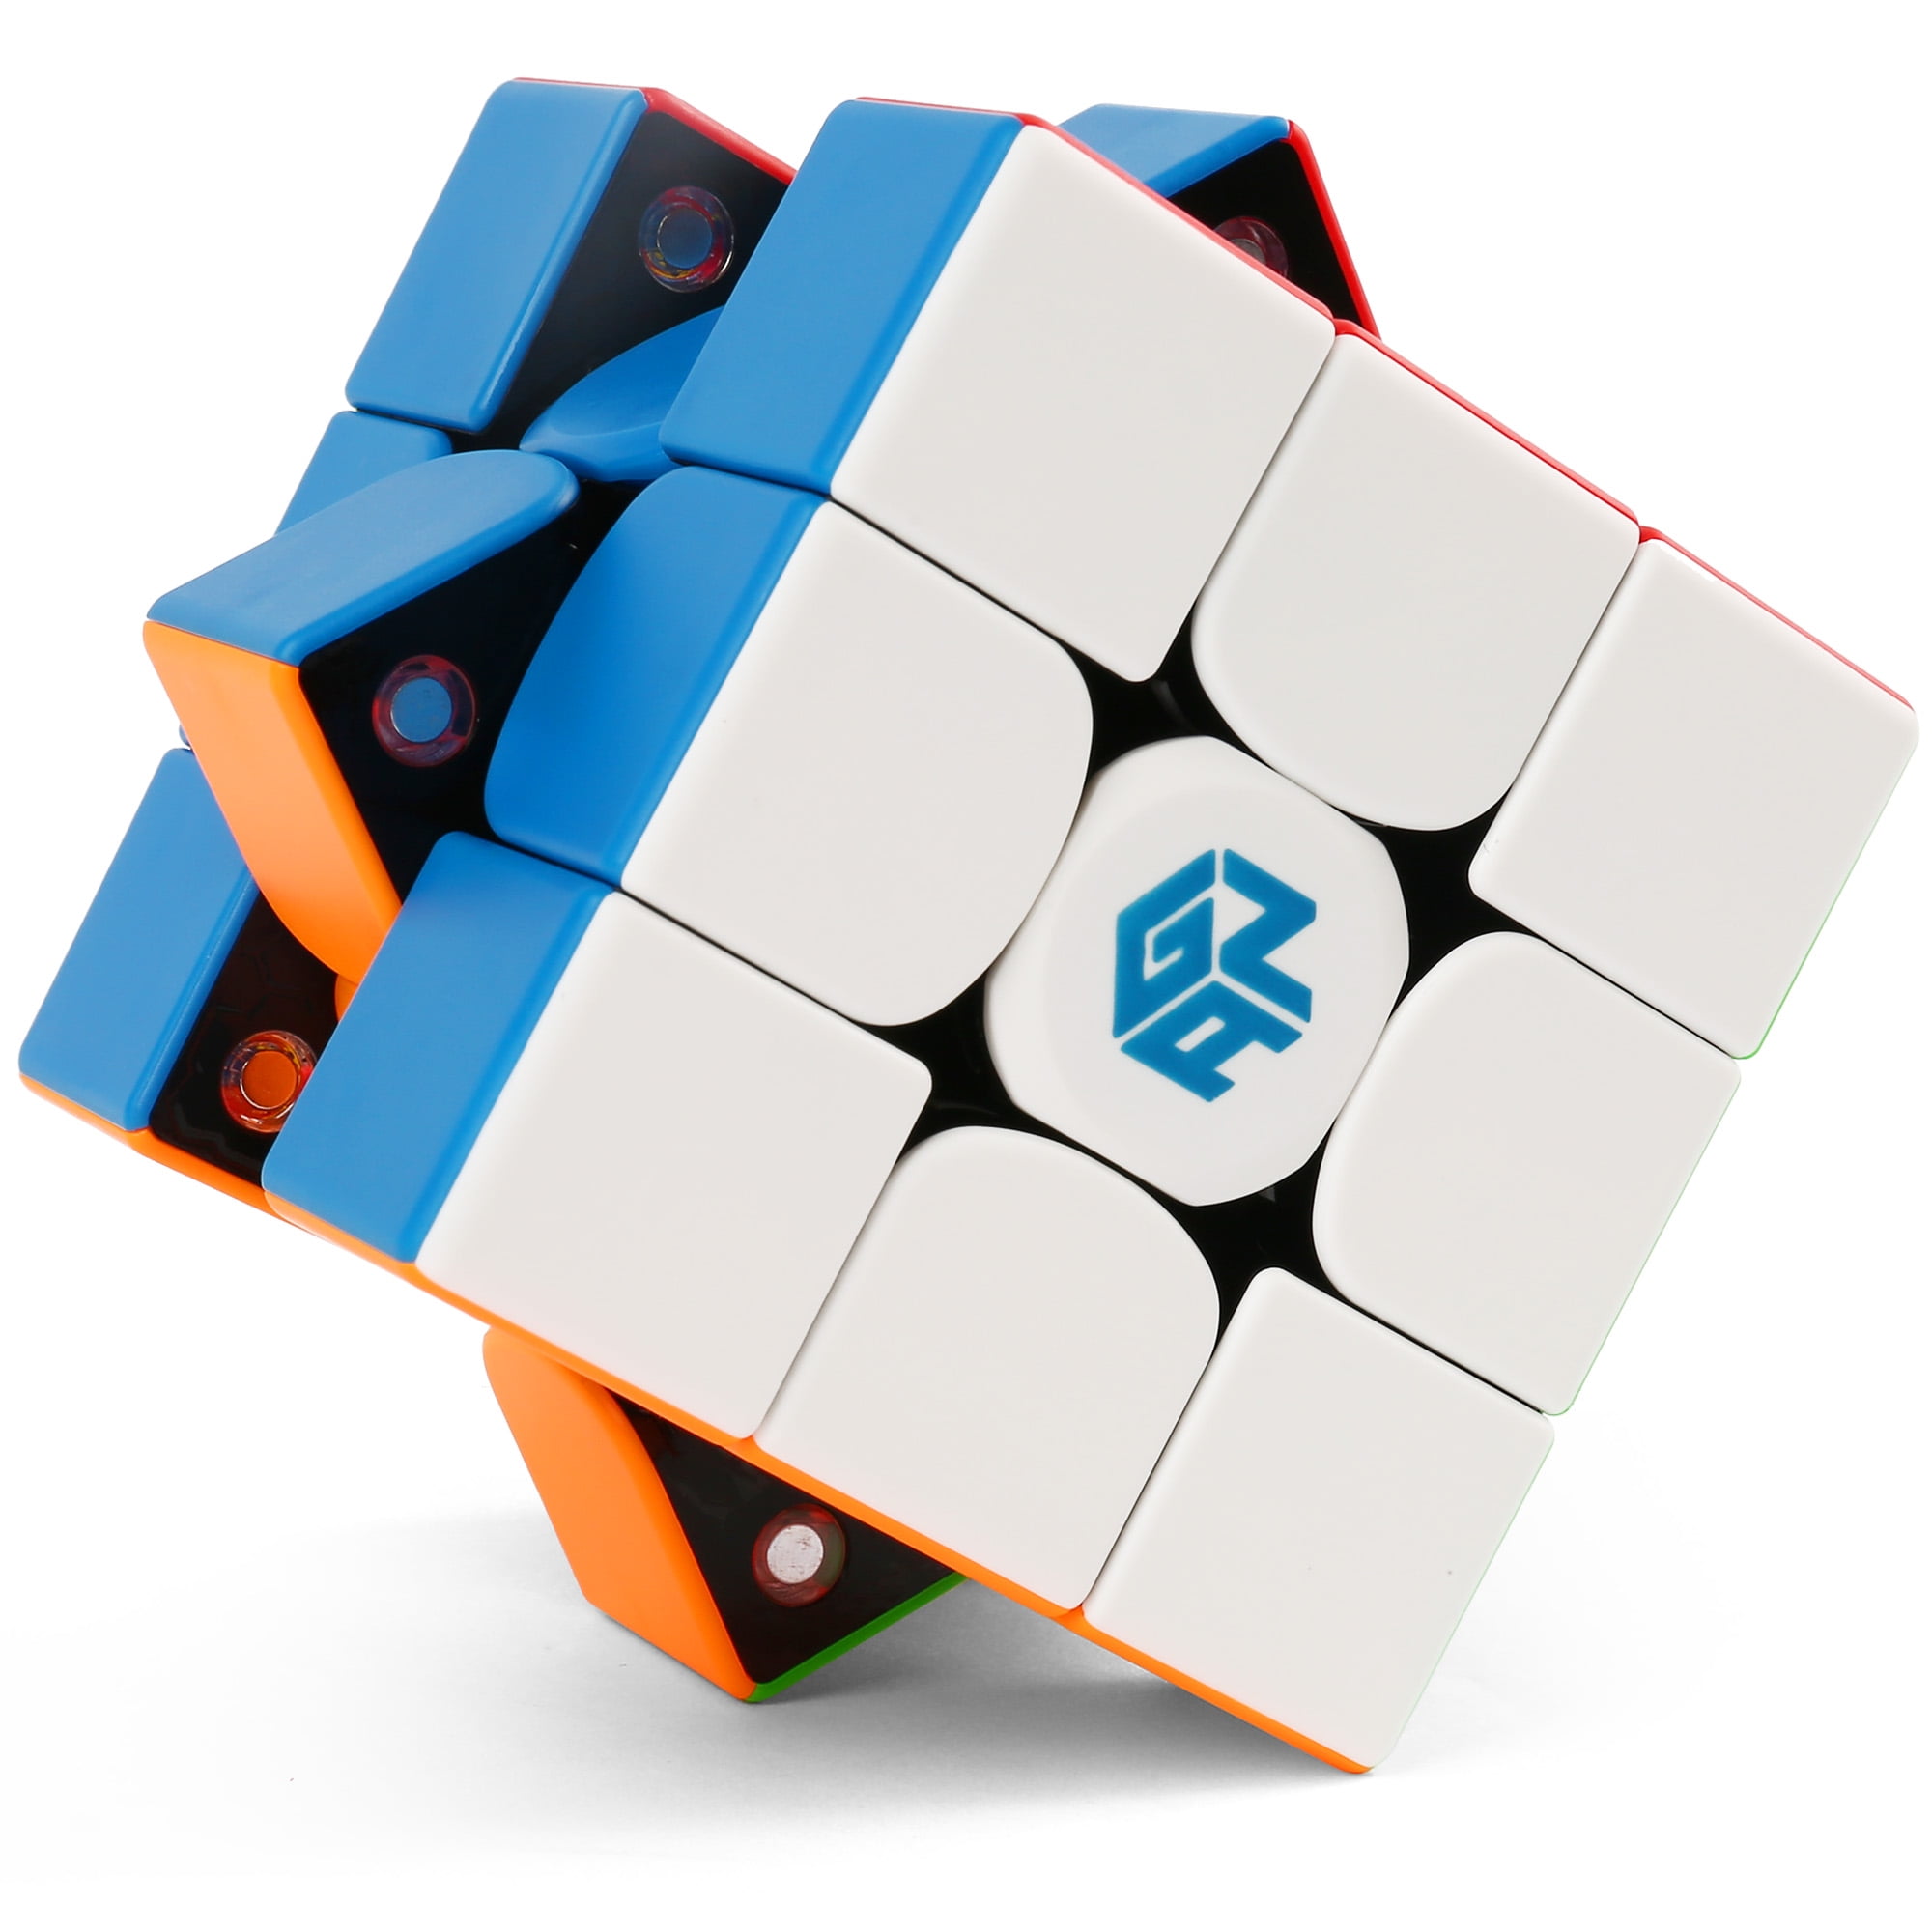  GAN 356 XS, Gans 3x3 Magnetic Speed Cube 356XS Magic Cube  Puzzle Toy (Stickerless) : Toys & Games